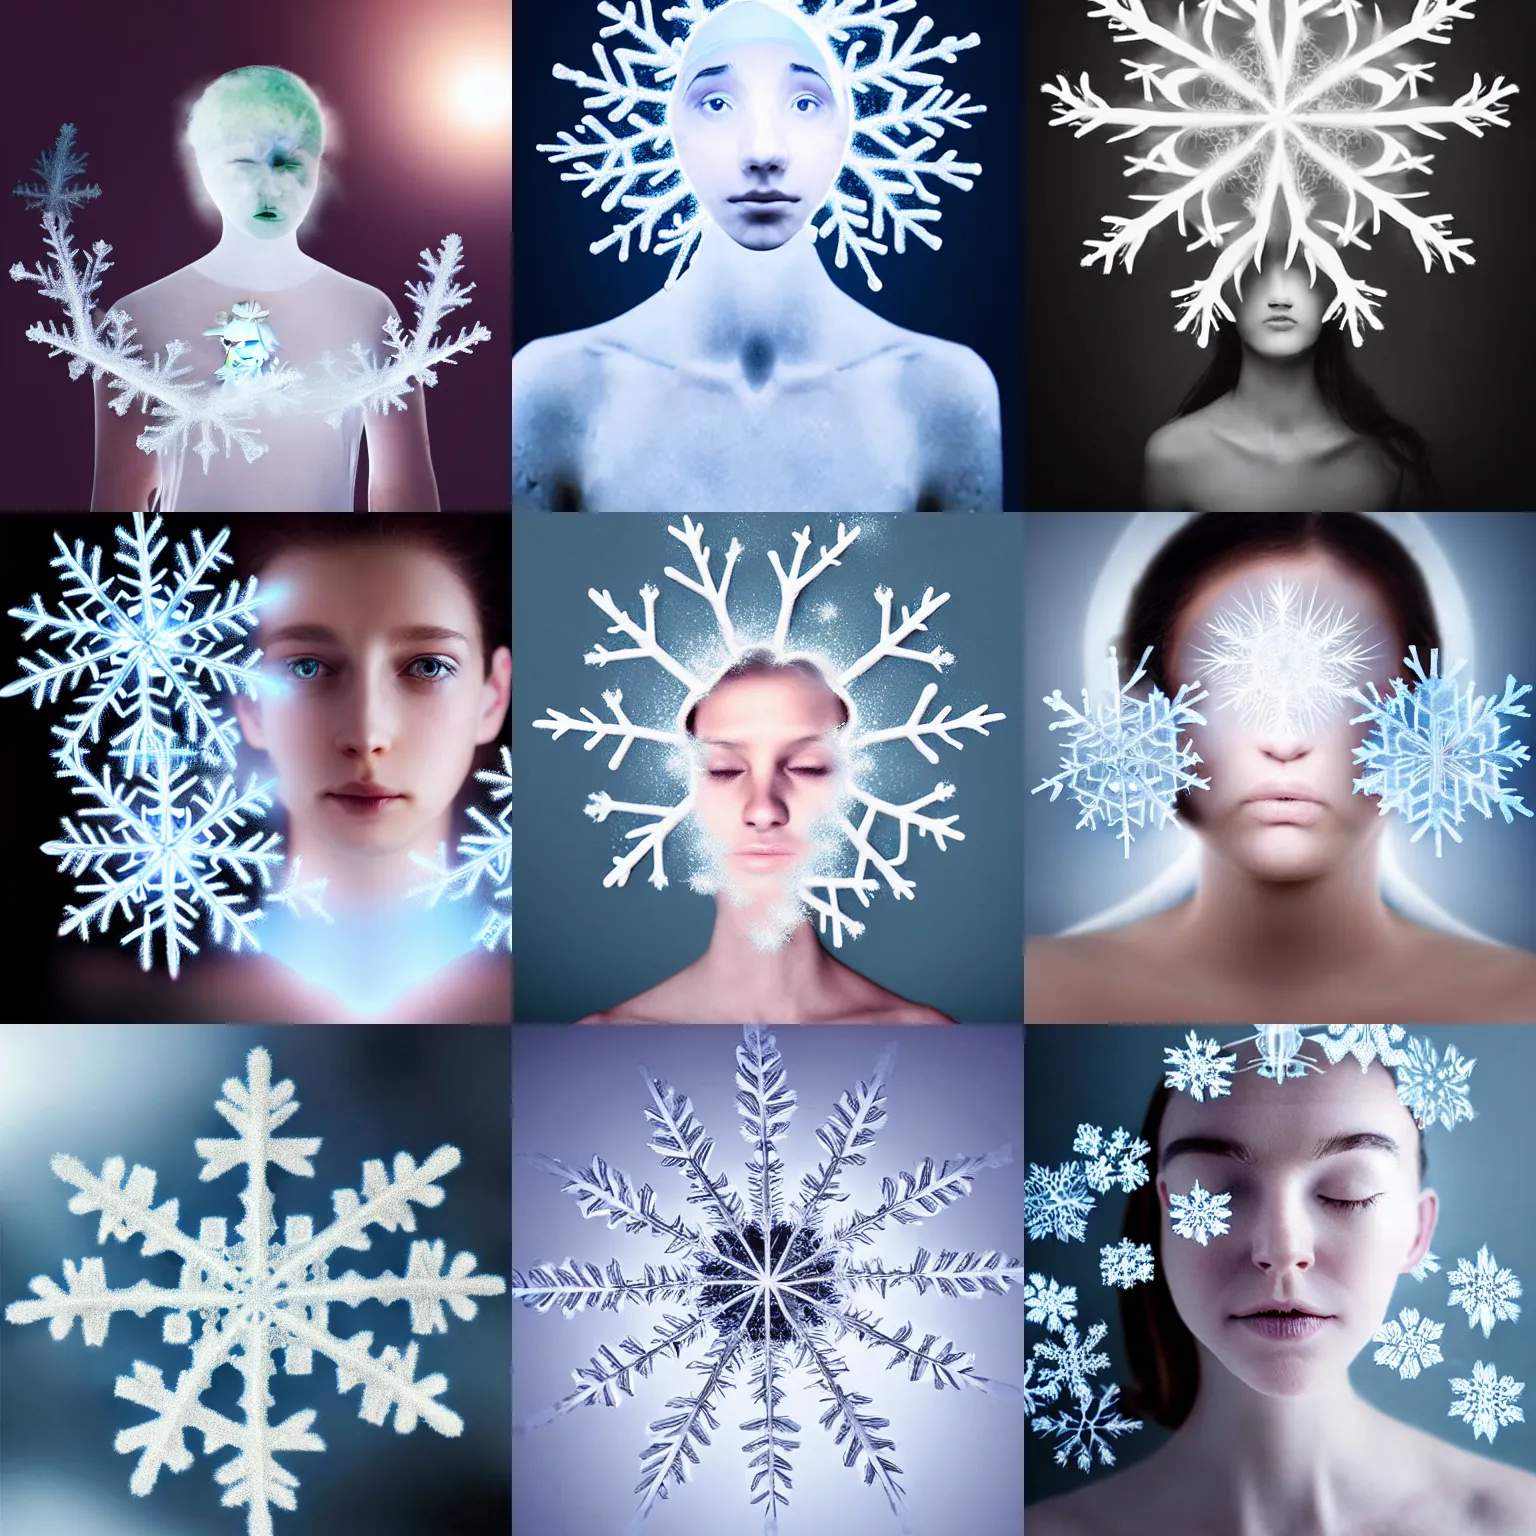 Prompt: surreal photography silk snowflake with ethereal transparent human face